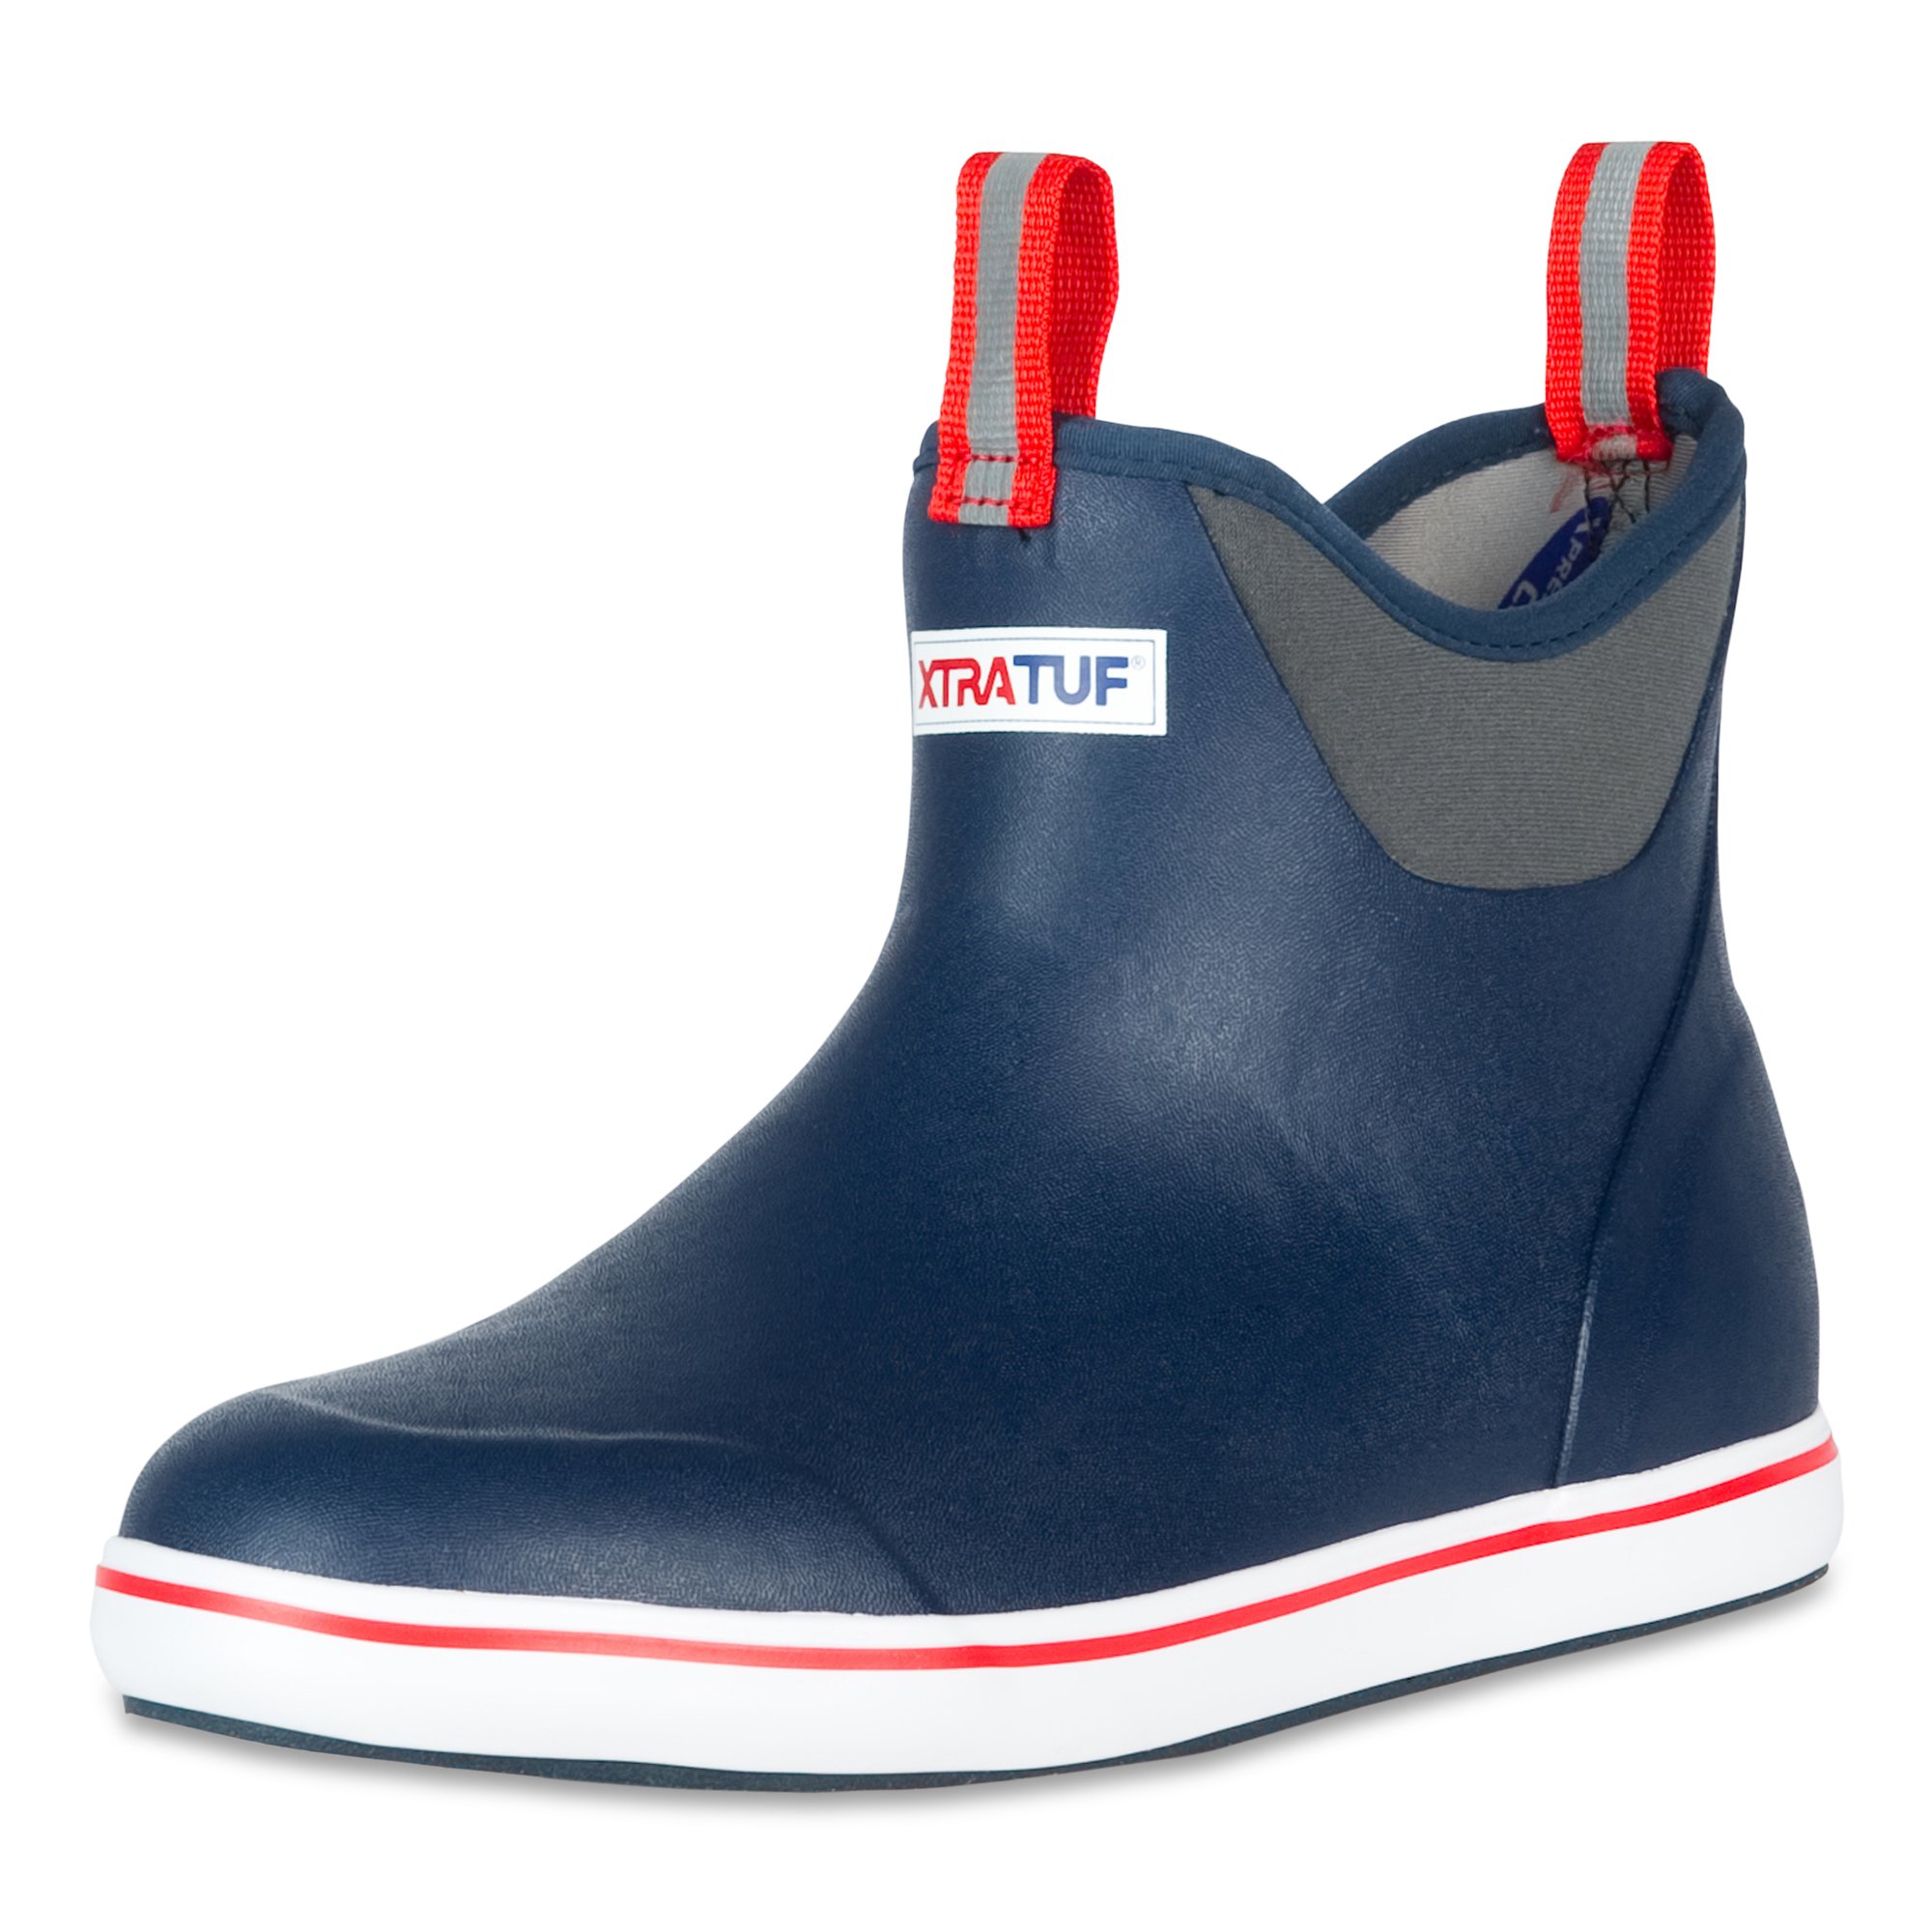 XTRATUF Performance Series 6 Inch Mens Full Rubber Ankle Deck Boots - Navy & Red  - Size 12